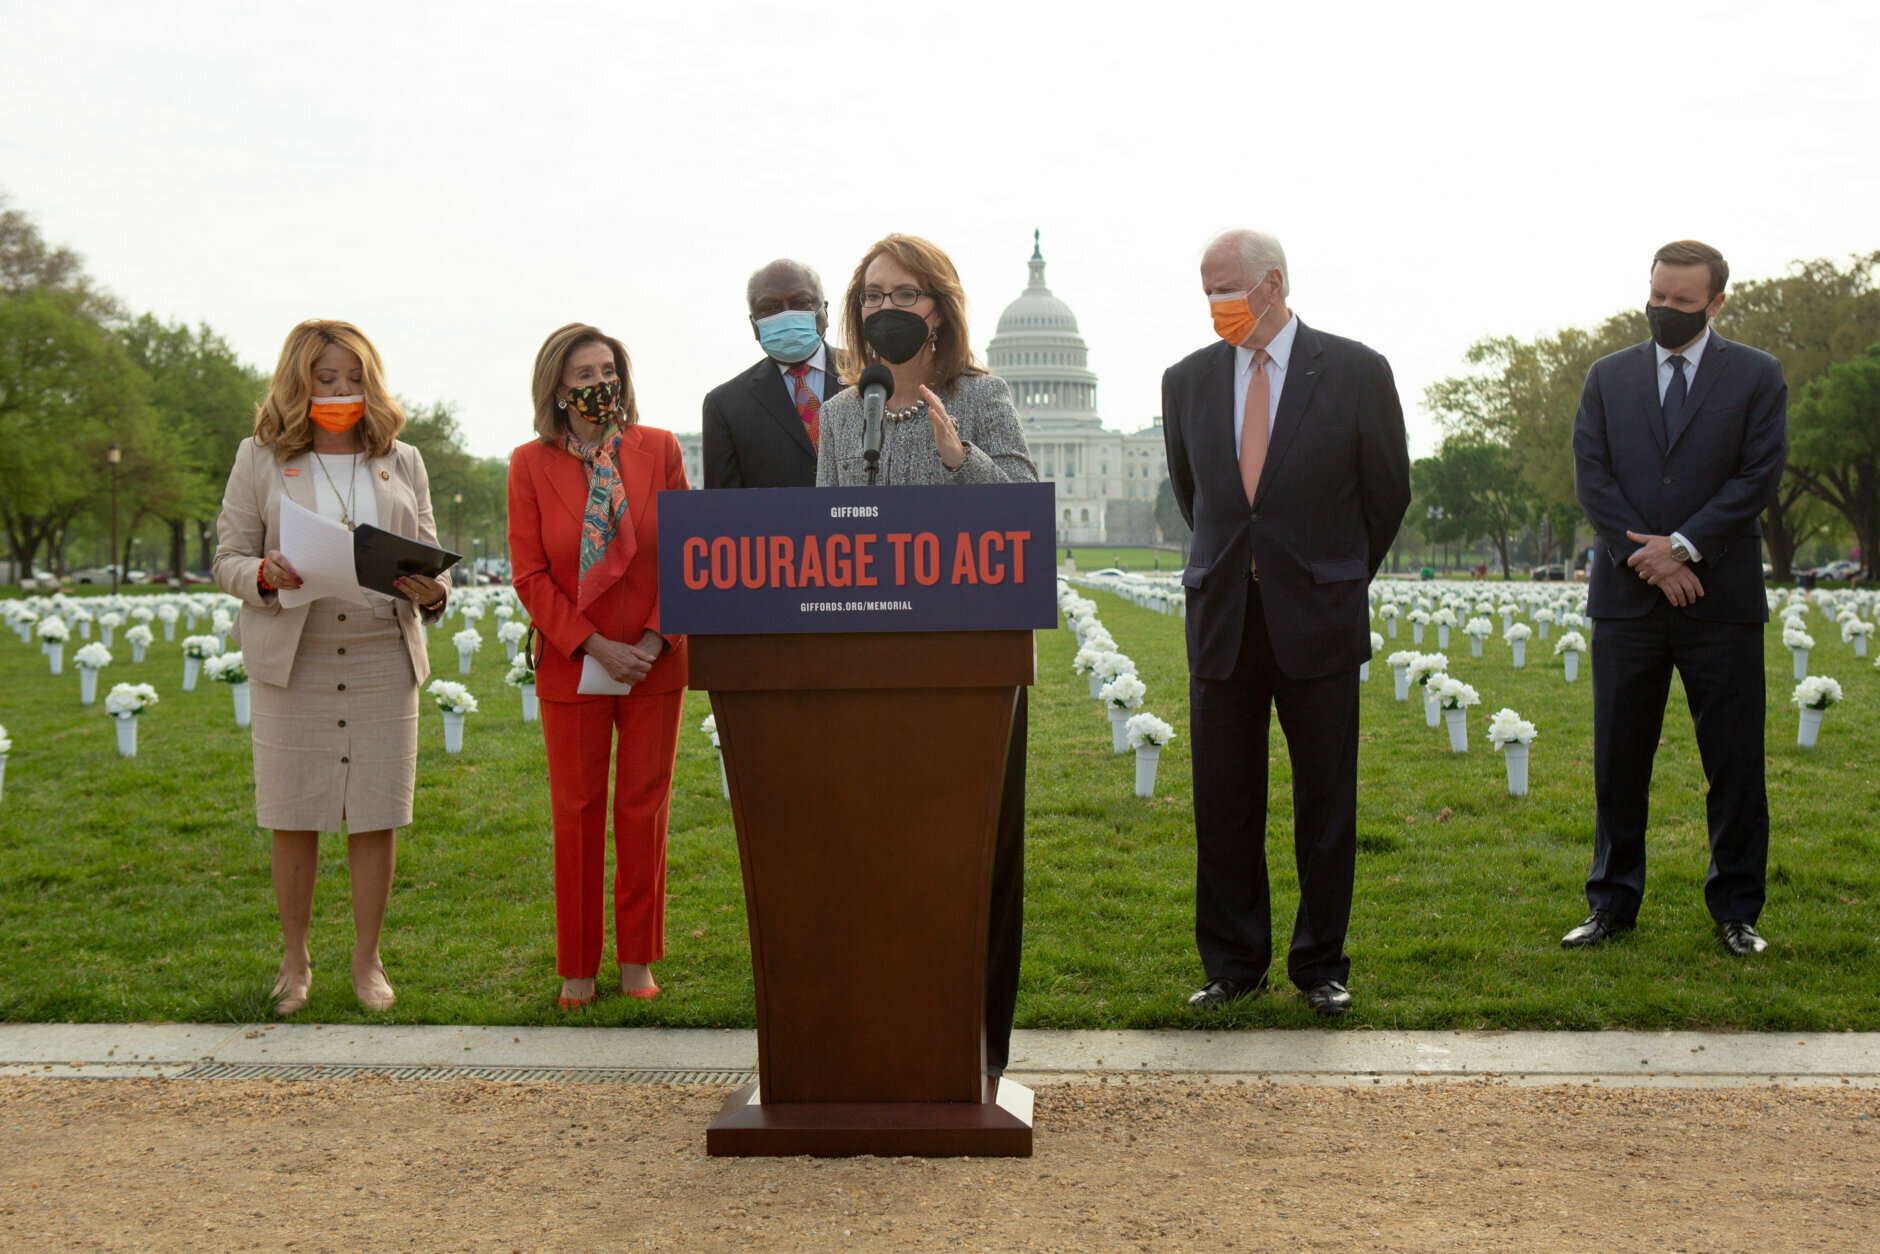 A press conference inaugurates the Gun Violence Memorial, a temporary installation consisting of 40,000 silk flowers, on the National Mall in Washington, D.C., April 14, 2021. (photo by Allison Shelley/Emic Films)